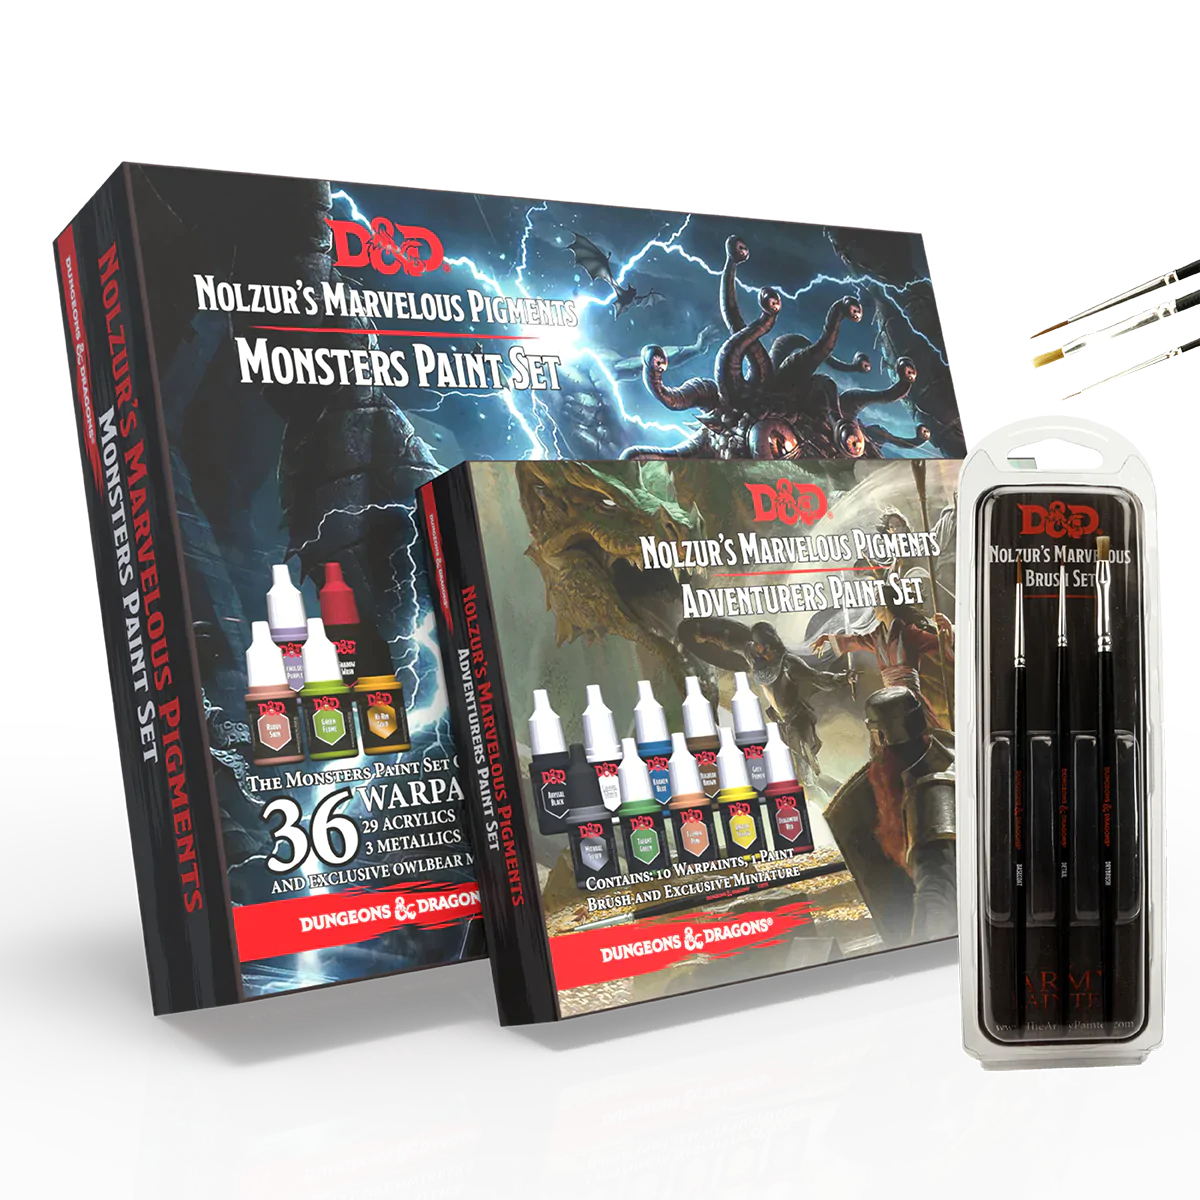 The Army Painter | Dungeons and Dragons Nolzurs Marvelous Pigments Bundle | 46 A